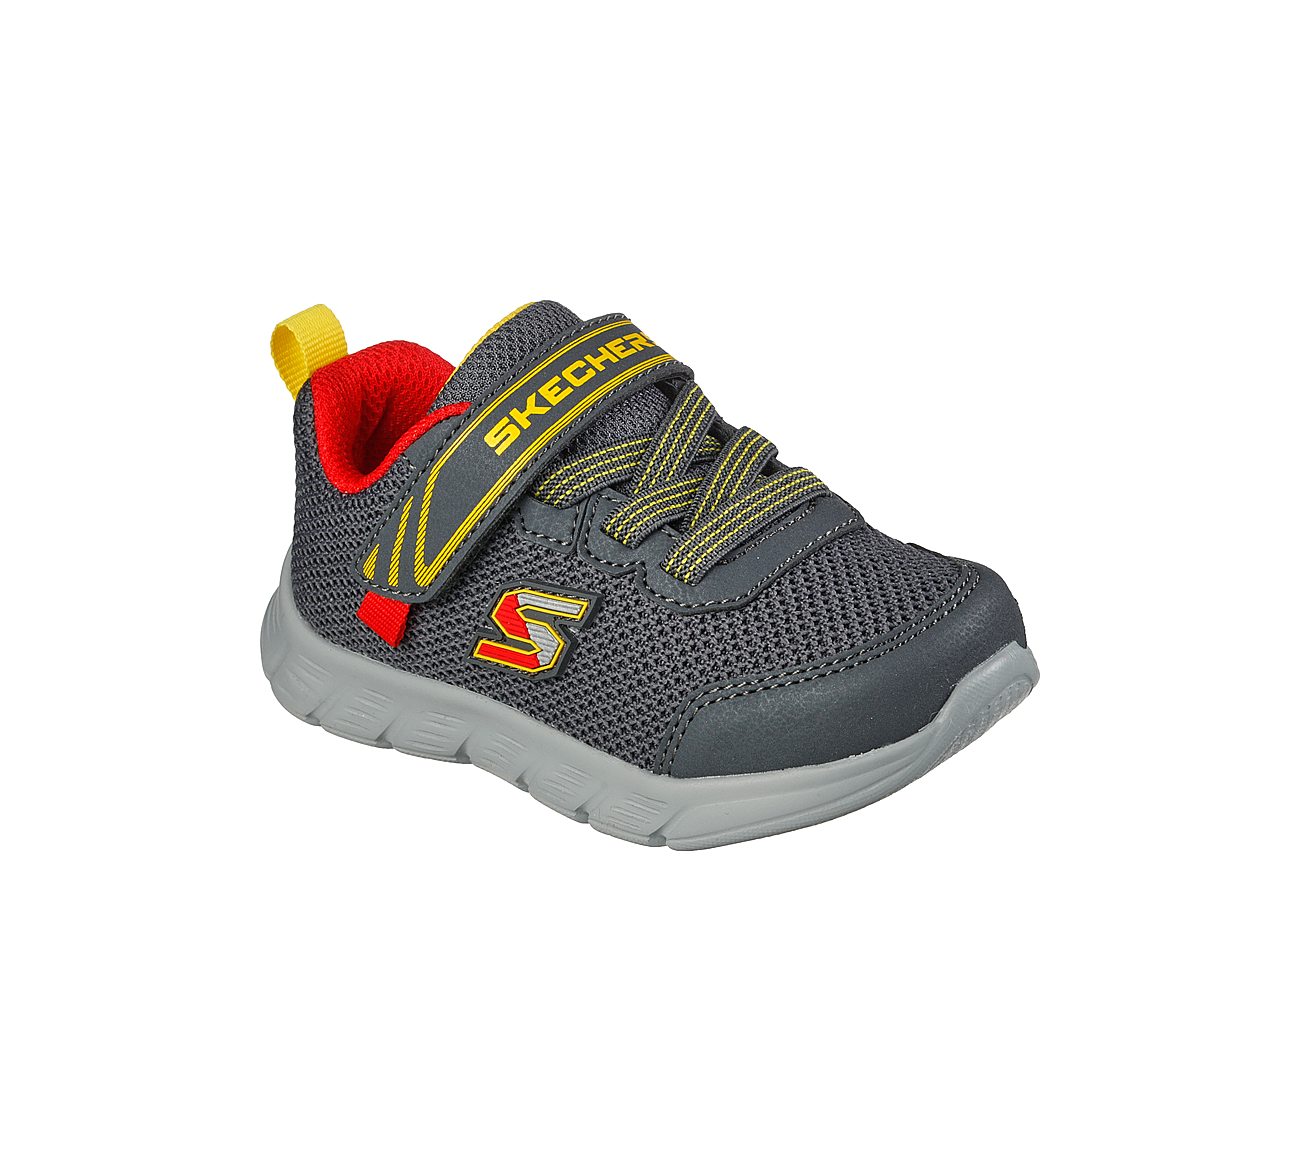 COMFY FLEX - MINI TRAINER, CHARCOAL/RED Footwear Lateral View